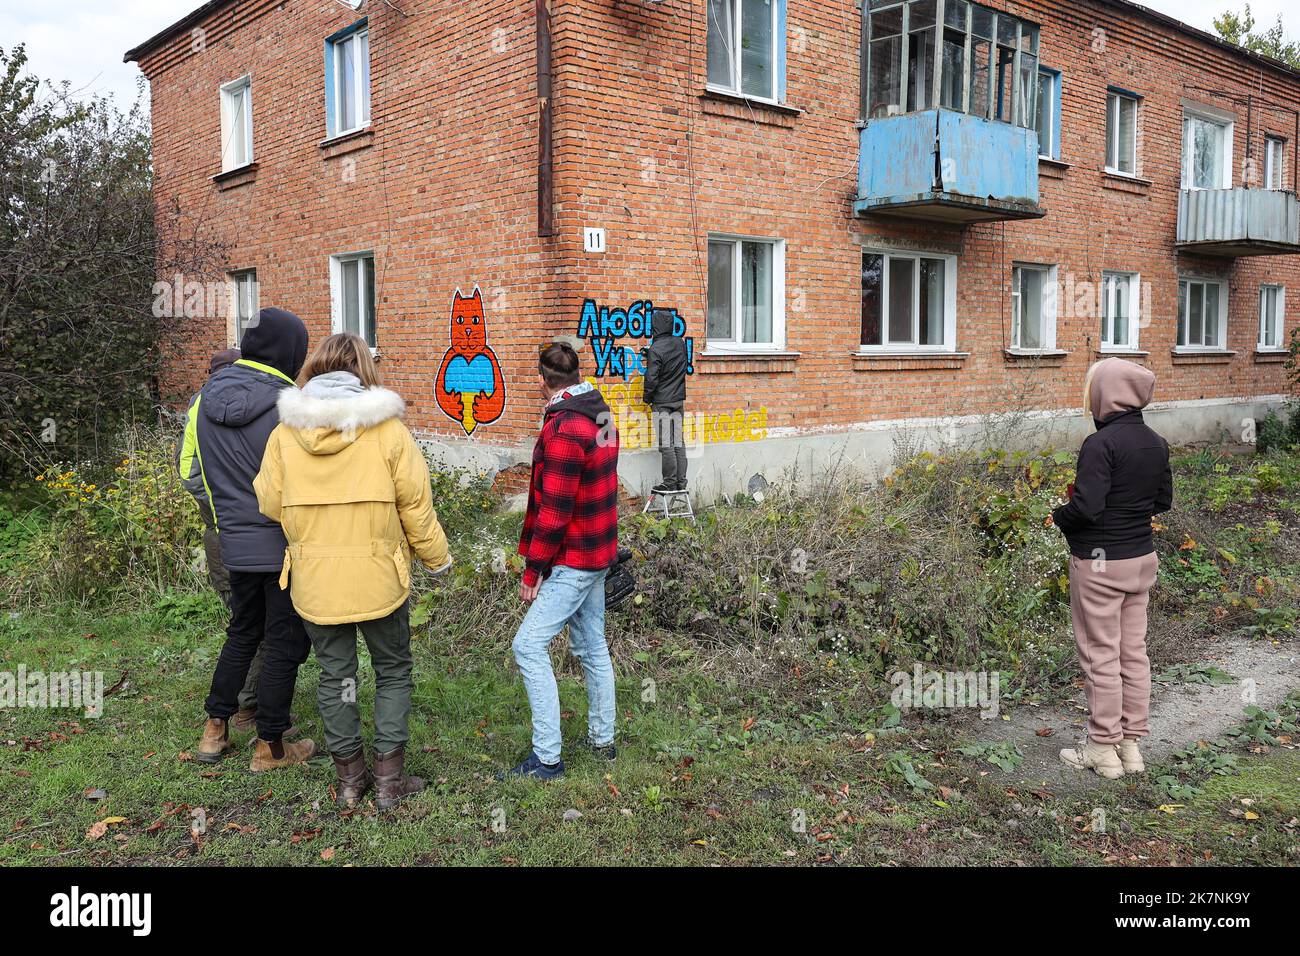 KHARKIV REGION, UKRAINE - OCTOBER 09, 2022 - Local residents watch artists create a mural as part of the 'Cultural Landing' campaign in Shevchenkove village, Kharkiv Region, northeastern Ukraine. Stock Photo